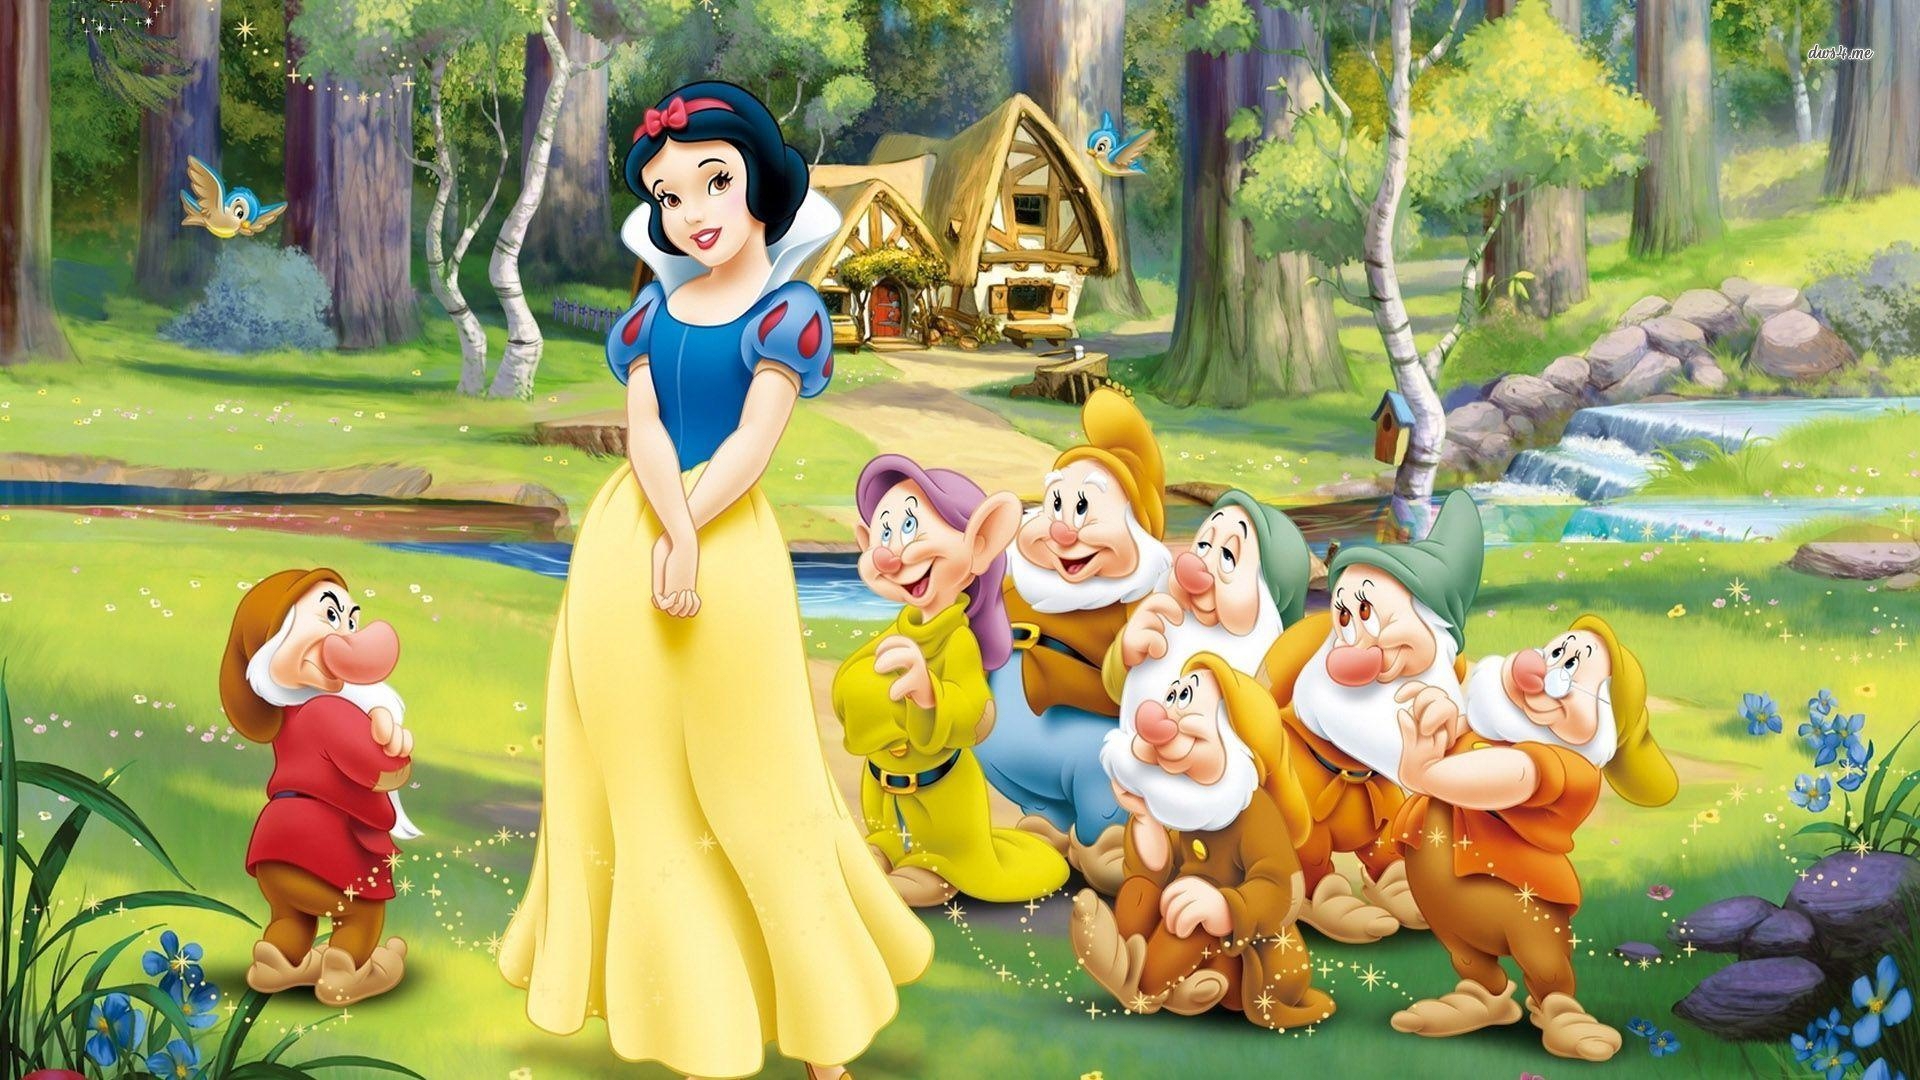 1920x1080 Snow White and the Seven Dwarfs Wallpapers Top Free Snow White and the Seven Dwarfs Backgrounds